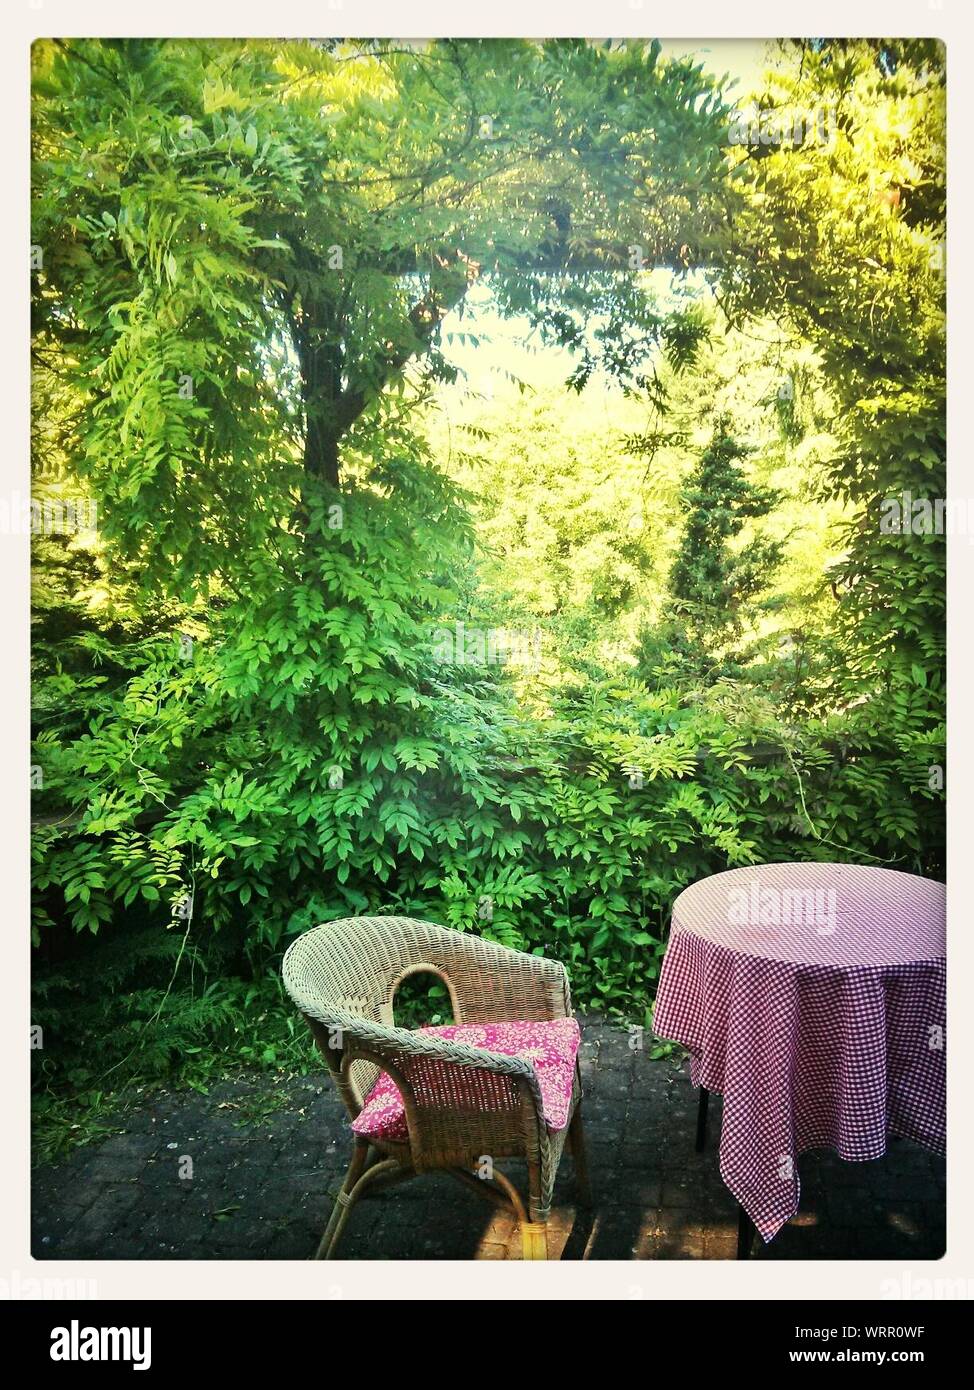 Outdoor Furniture Against Plants Stock Photo